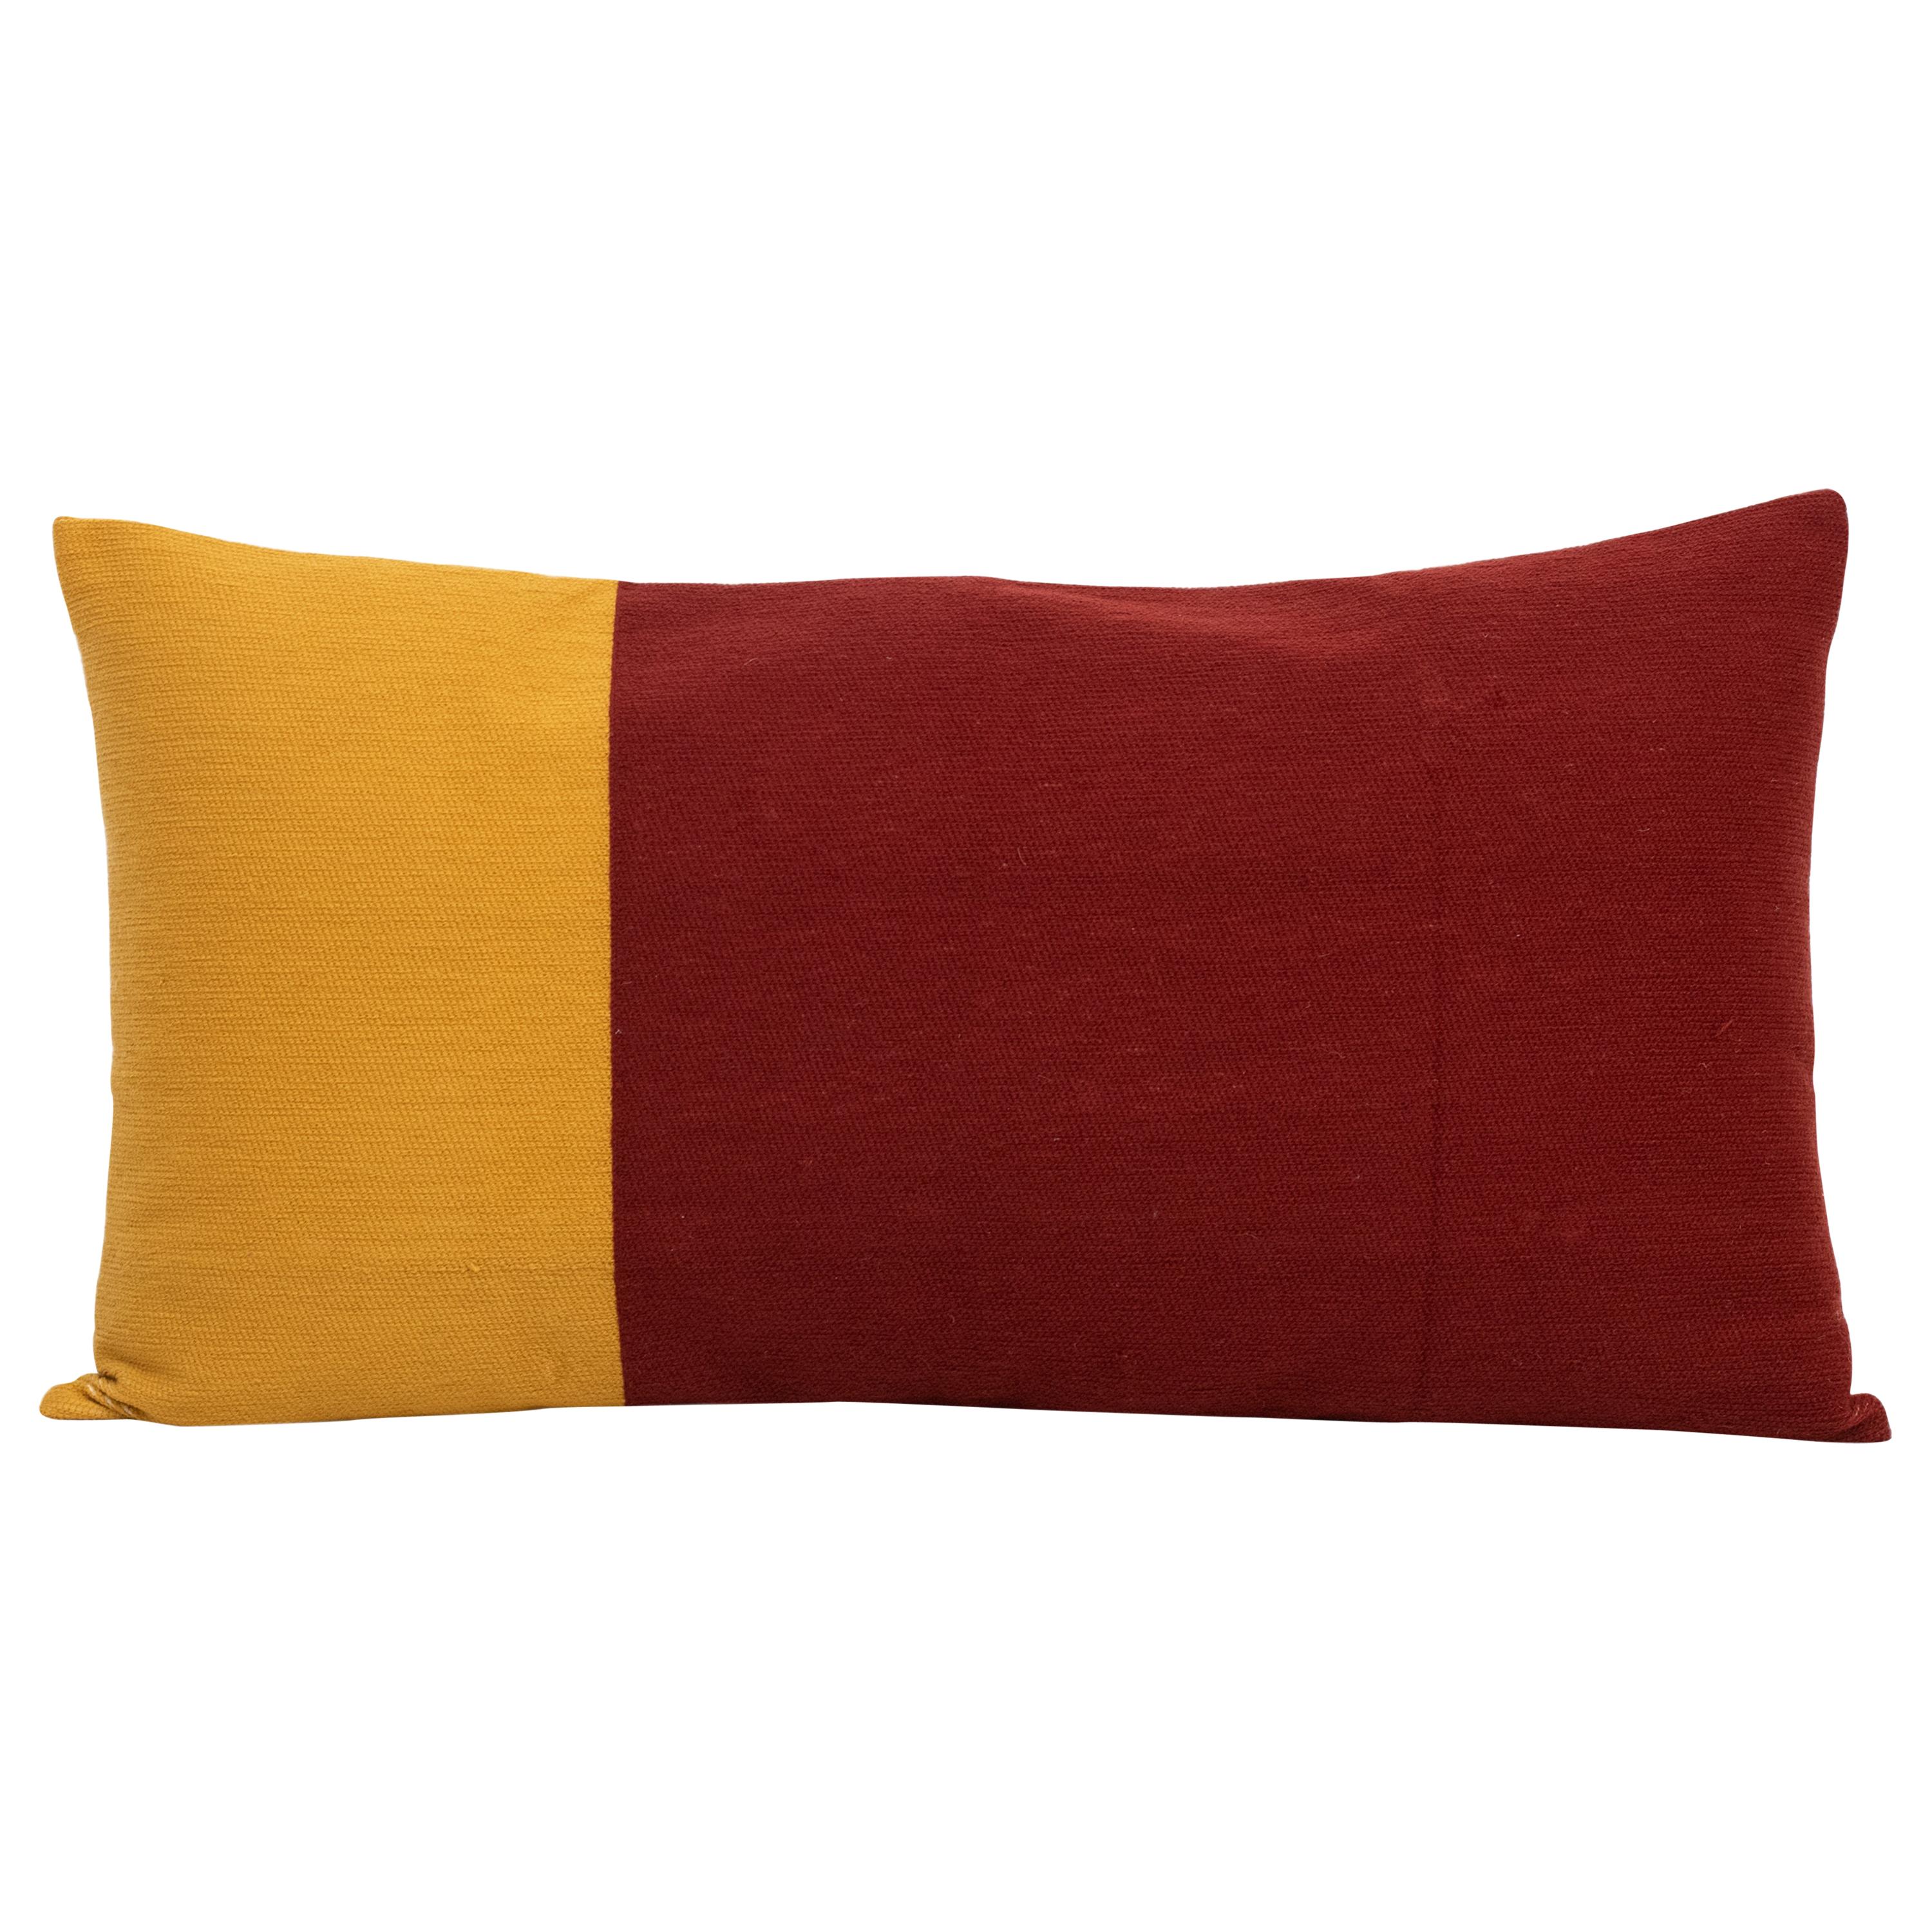 Modern Embroidery Pillow Cushion Cotton Red wine and Mustard Elegant